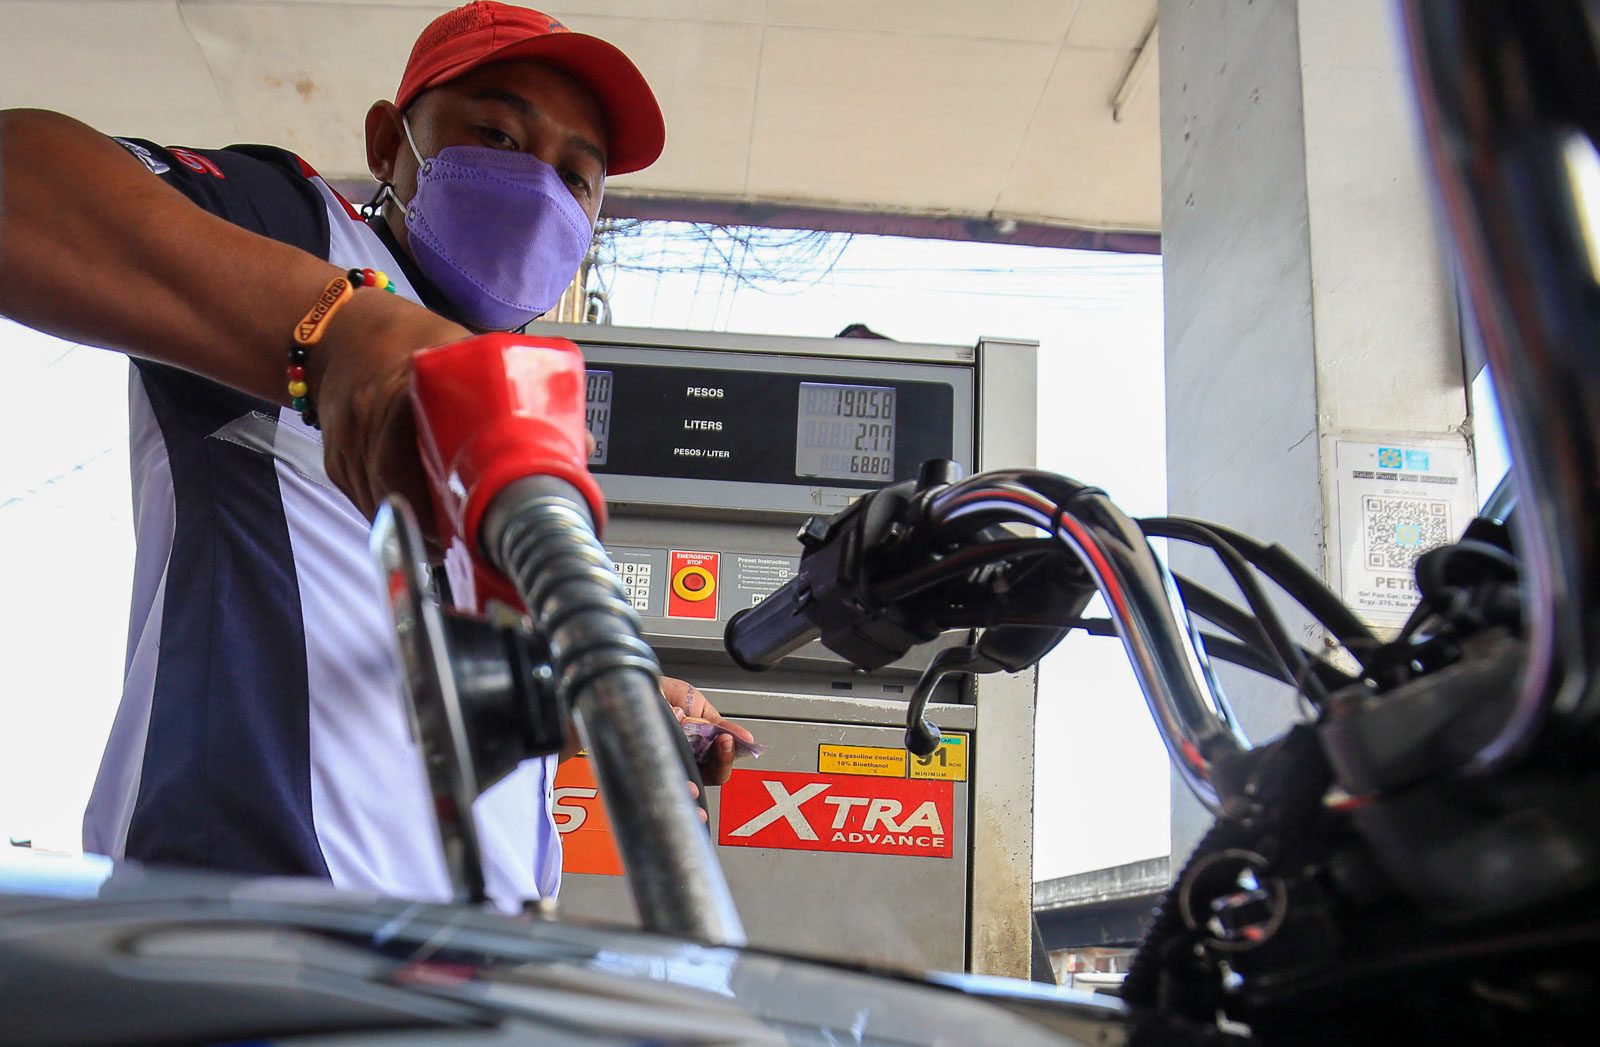 Big-time rollback in fuel prices could happen on March 22, says Cusi